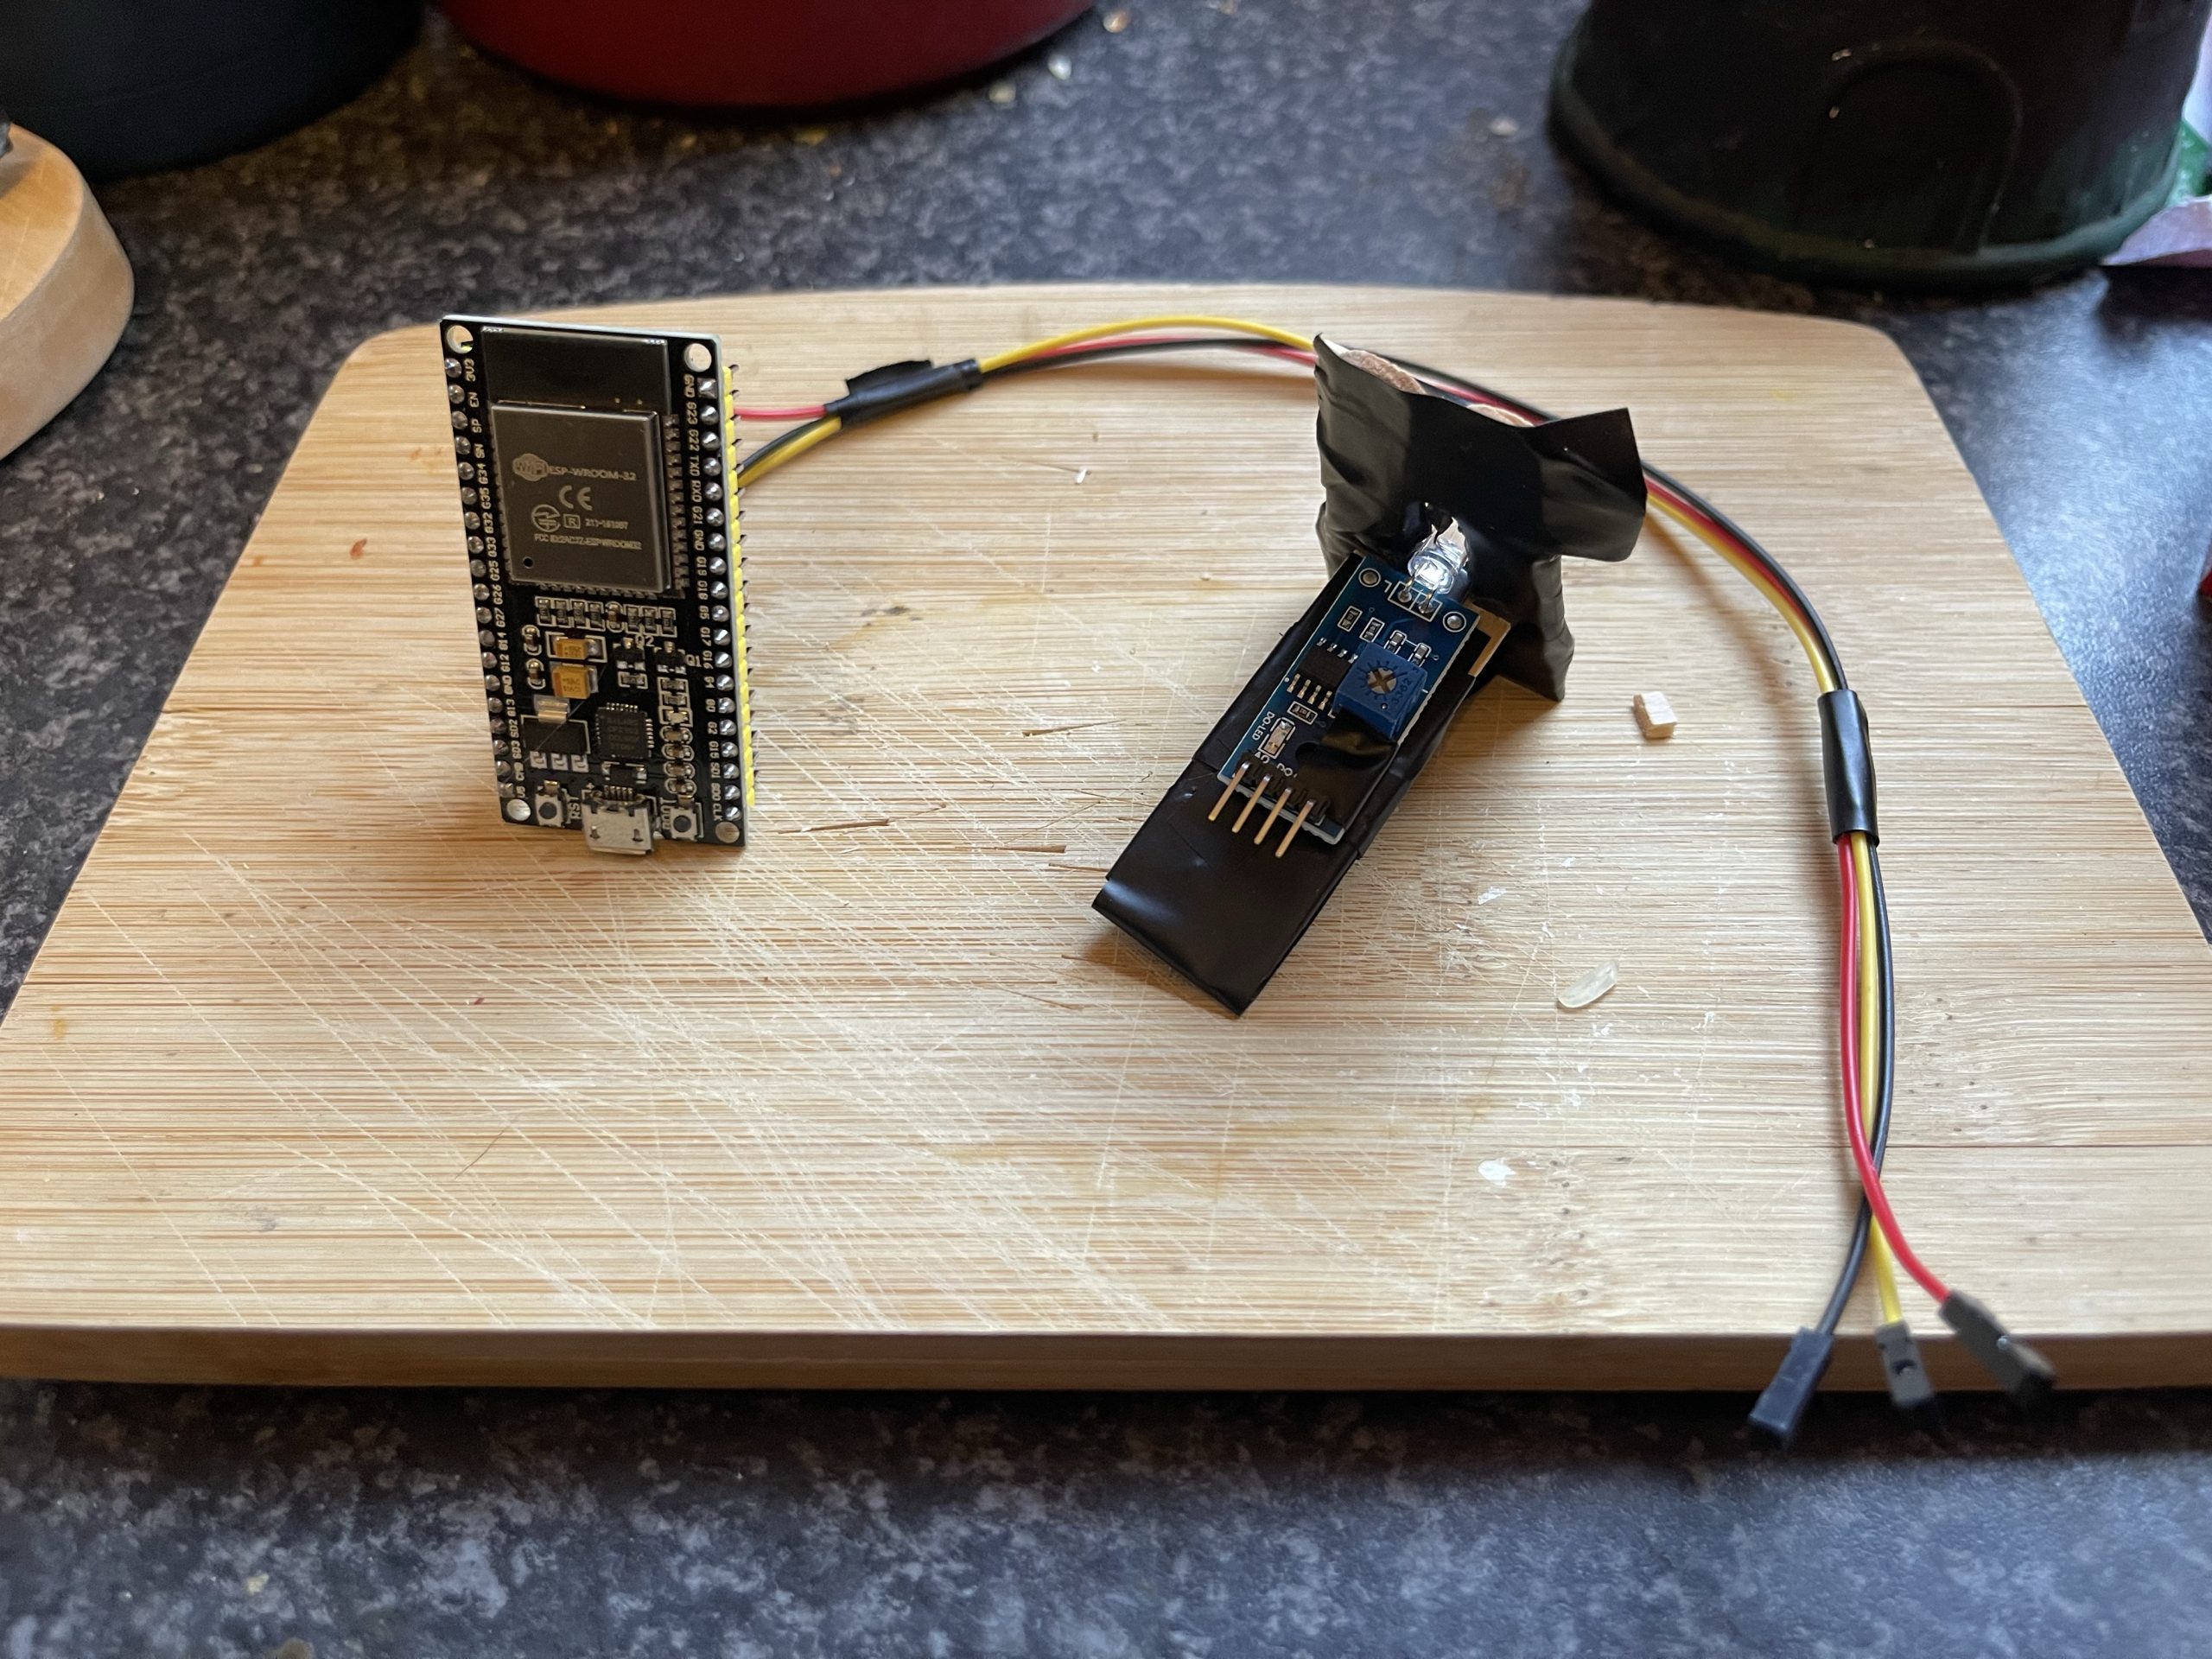 I built my first Smart Home device with lollipop sticks, electricians, tape and time.